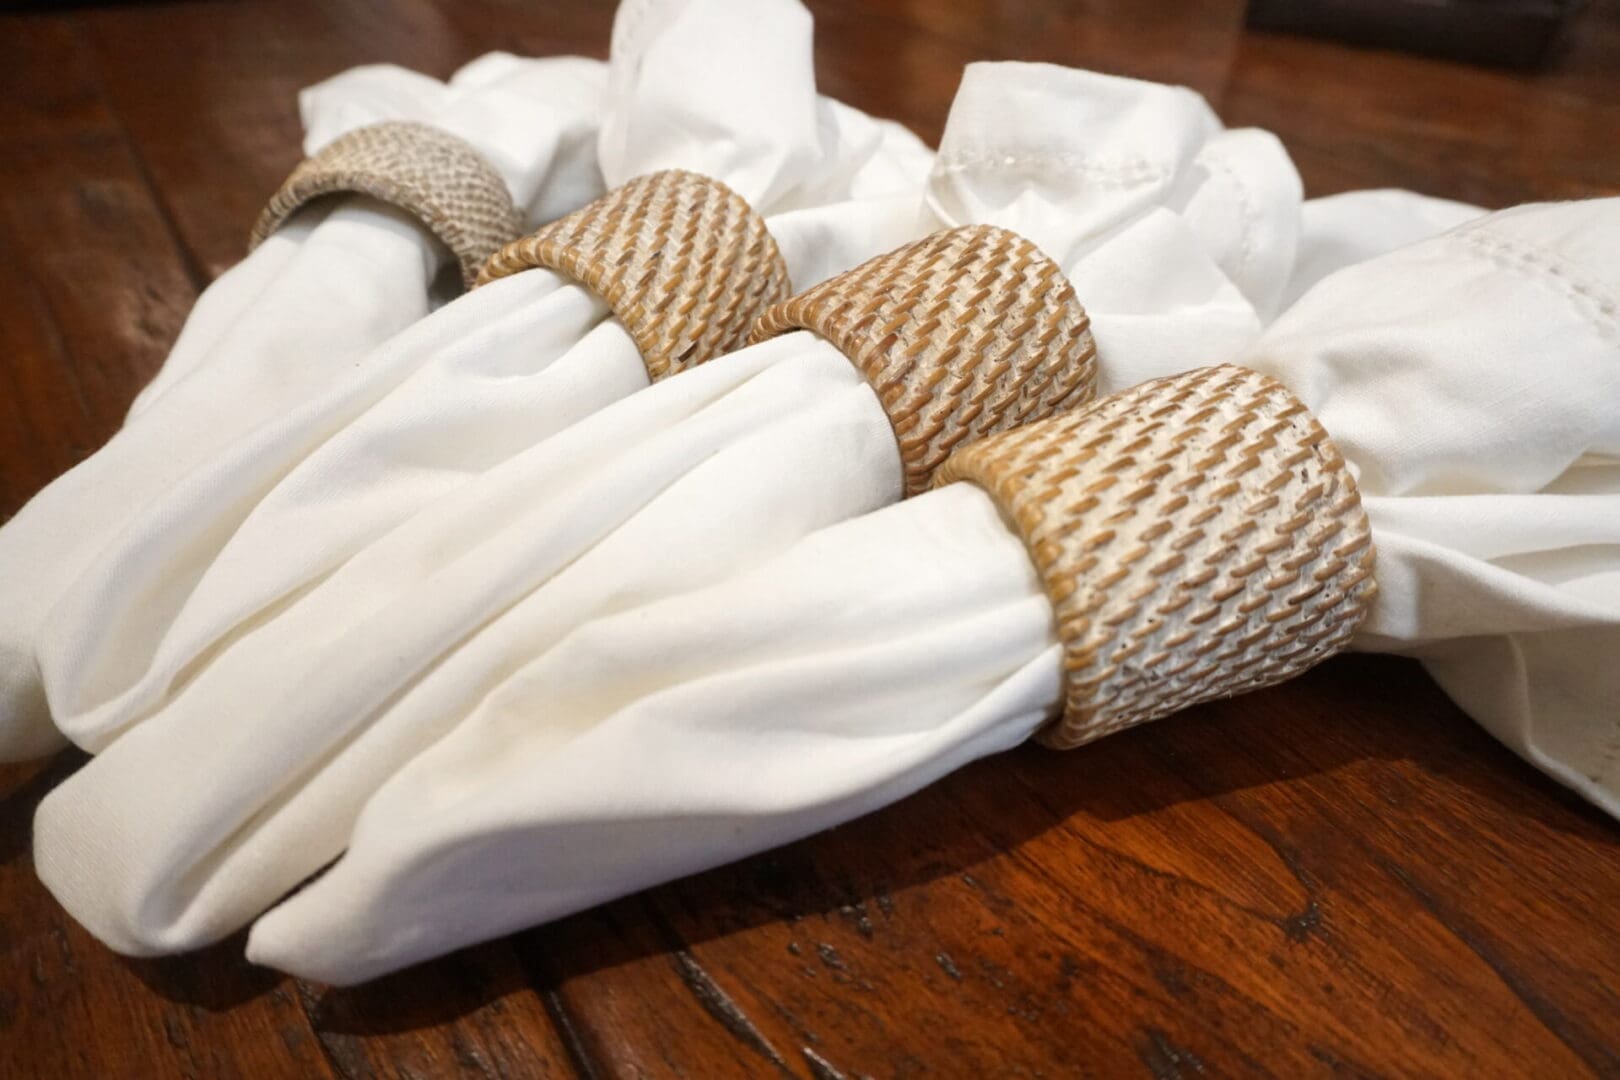 A wooden table with white napkins and rope wrapped around the ends.